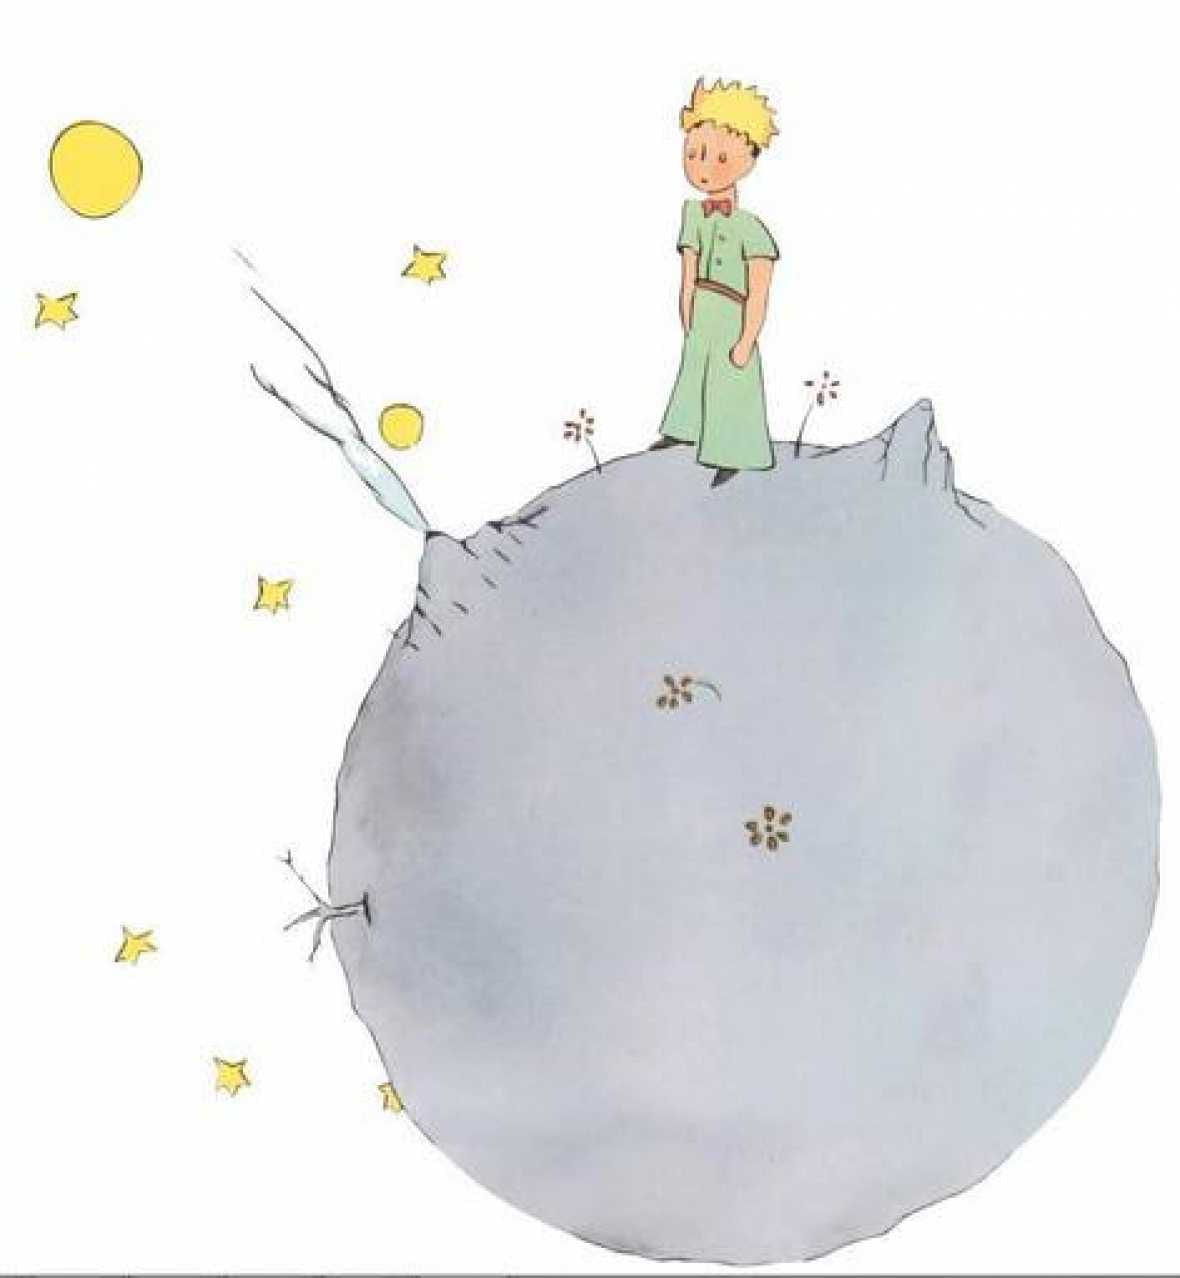 Little Prince on planet